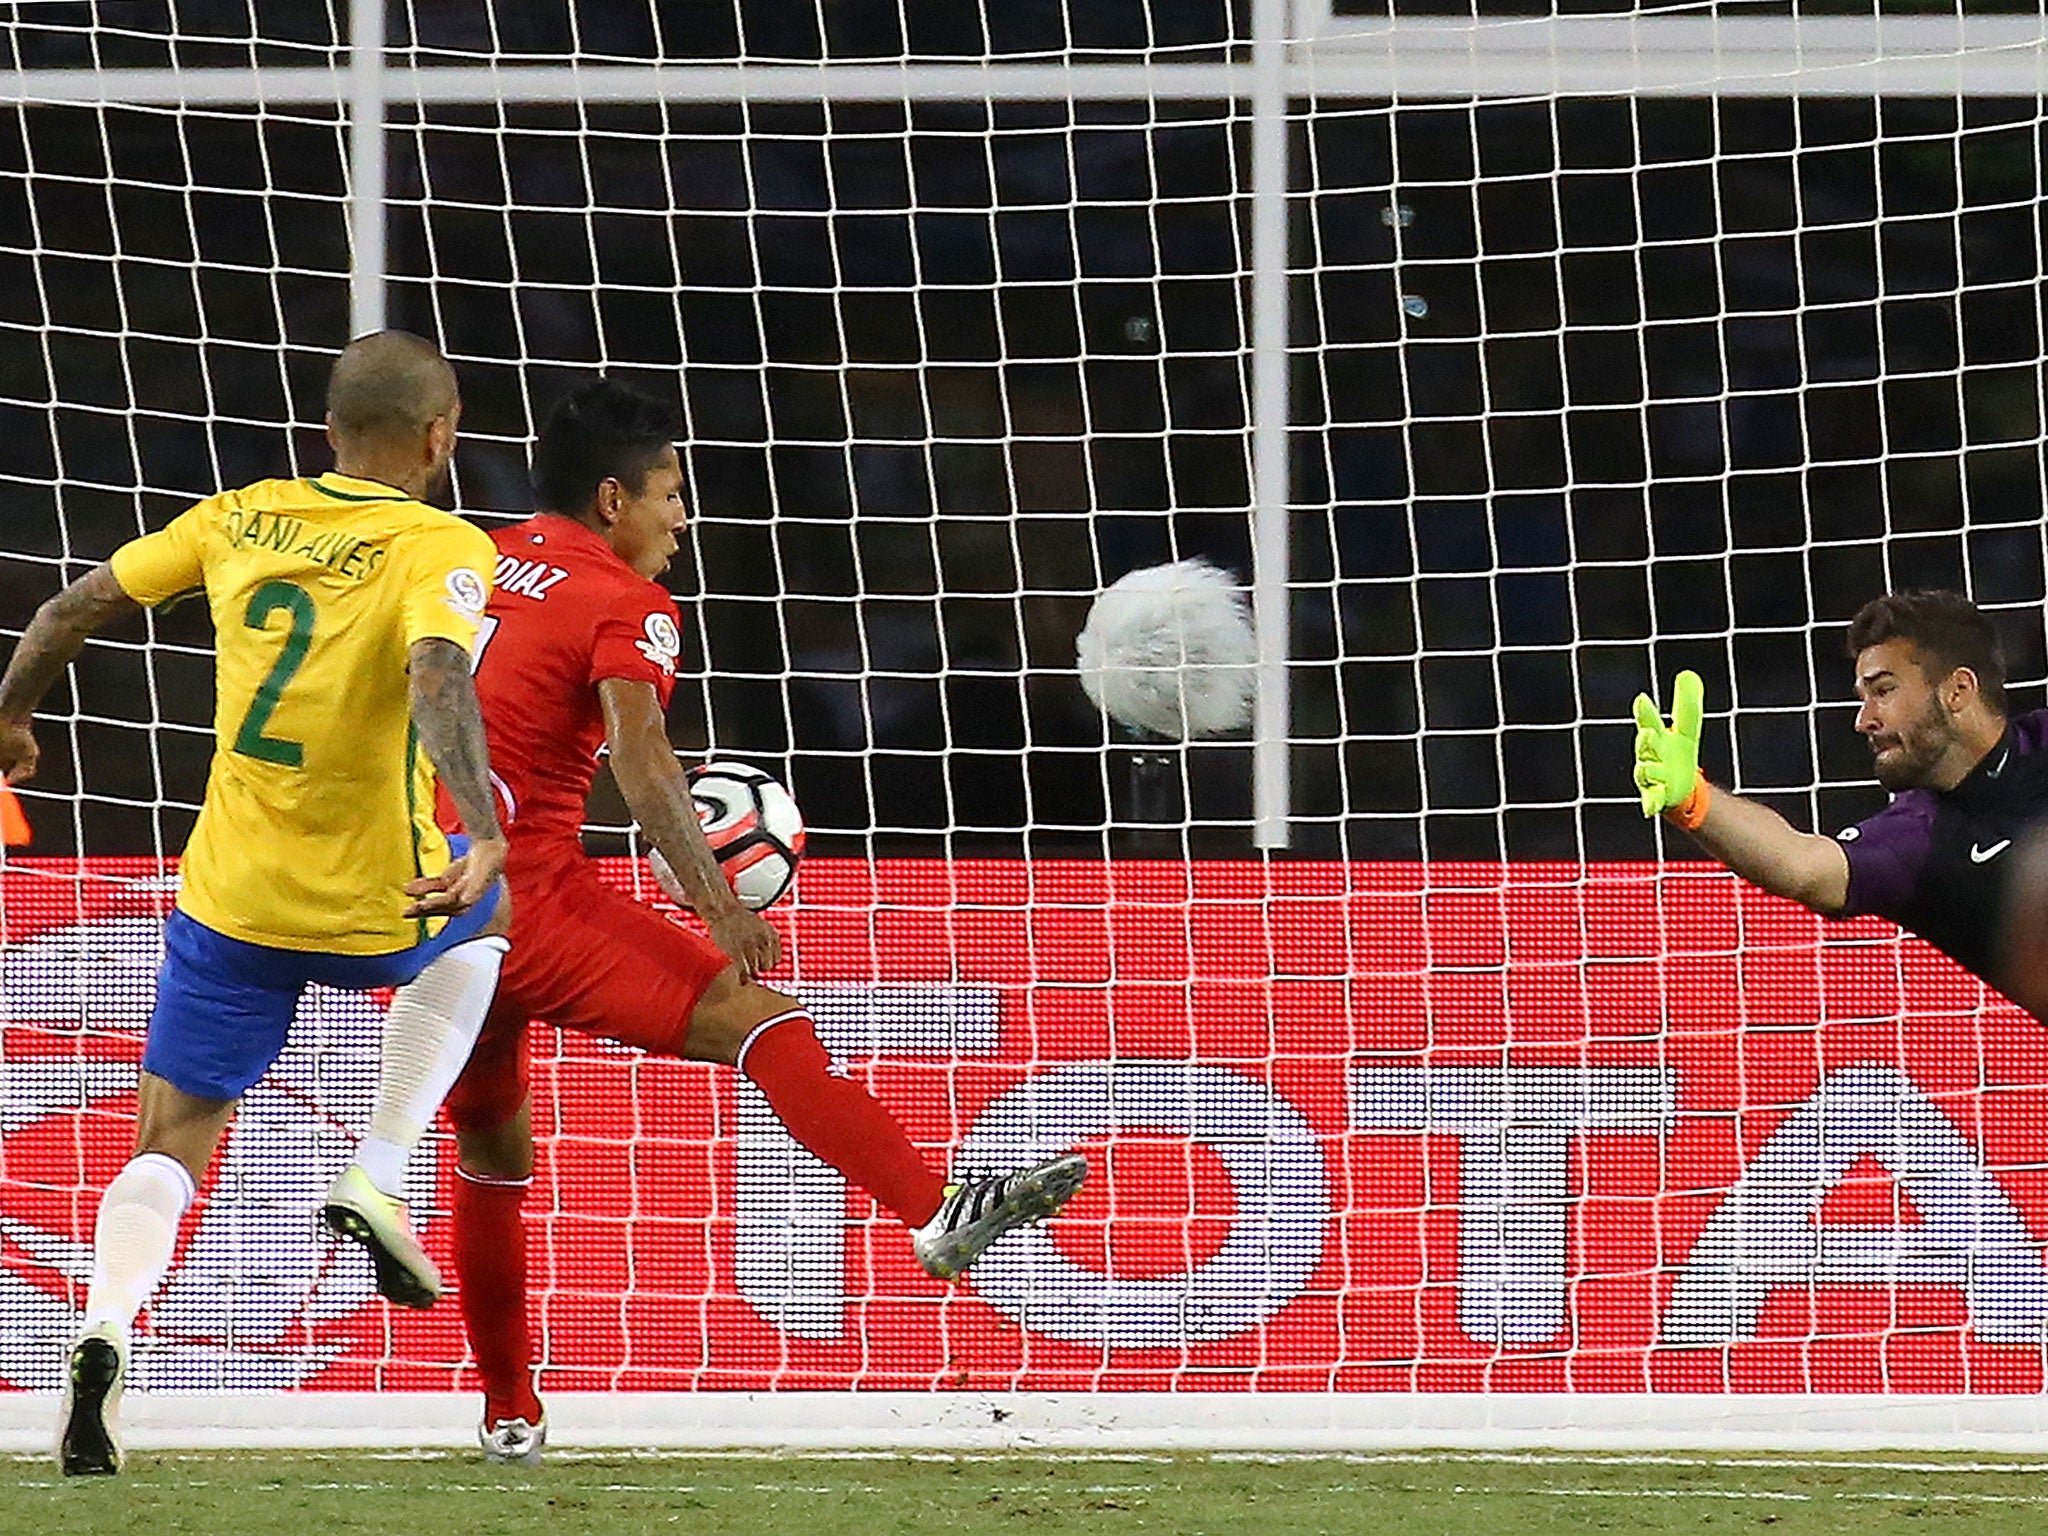 Raul Ruidiaz scores against Brazil with his hand